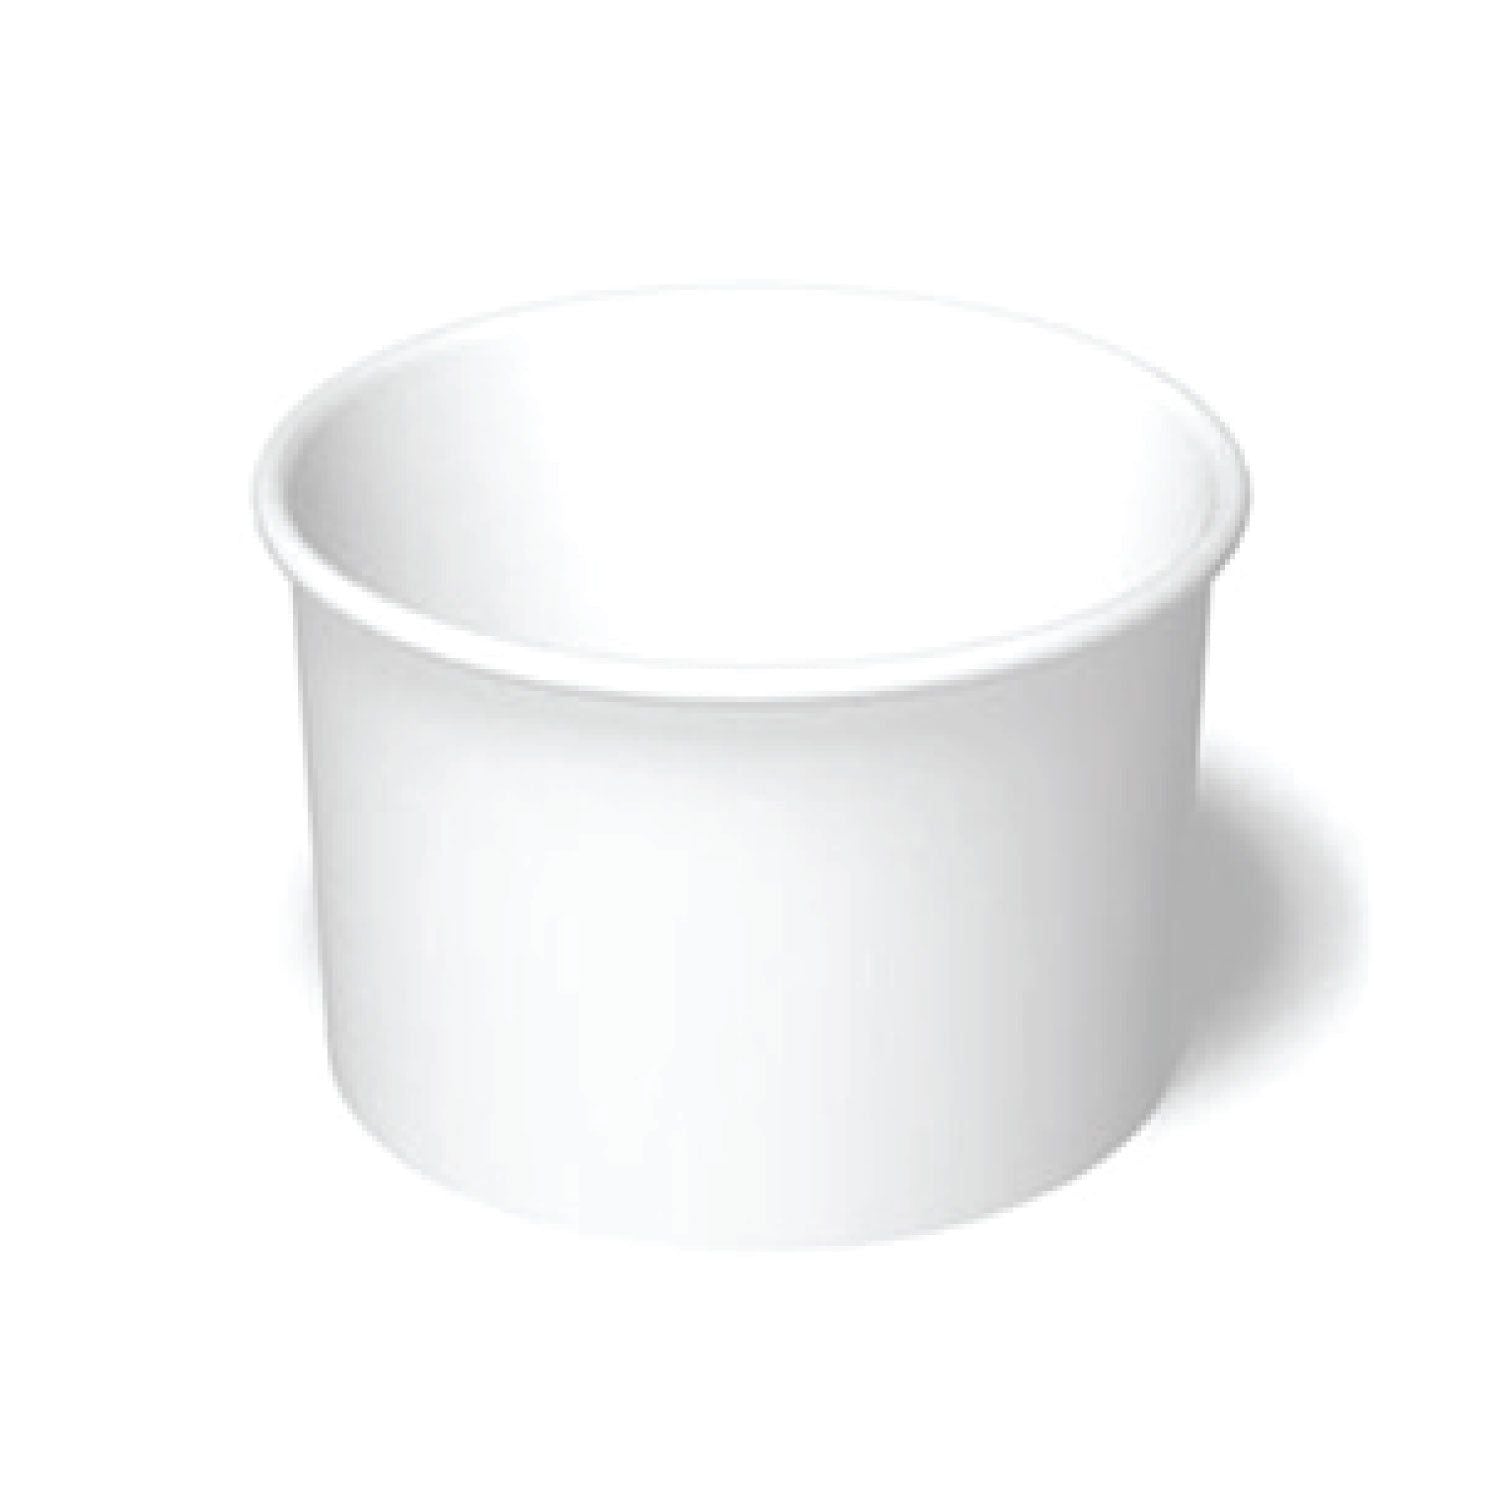 http://thecupstore.com/cdn/shop/files/opt-16oz-Blank-Recyclable-Paper-Food-Container.jpg?v=1686470618